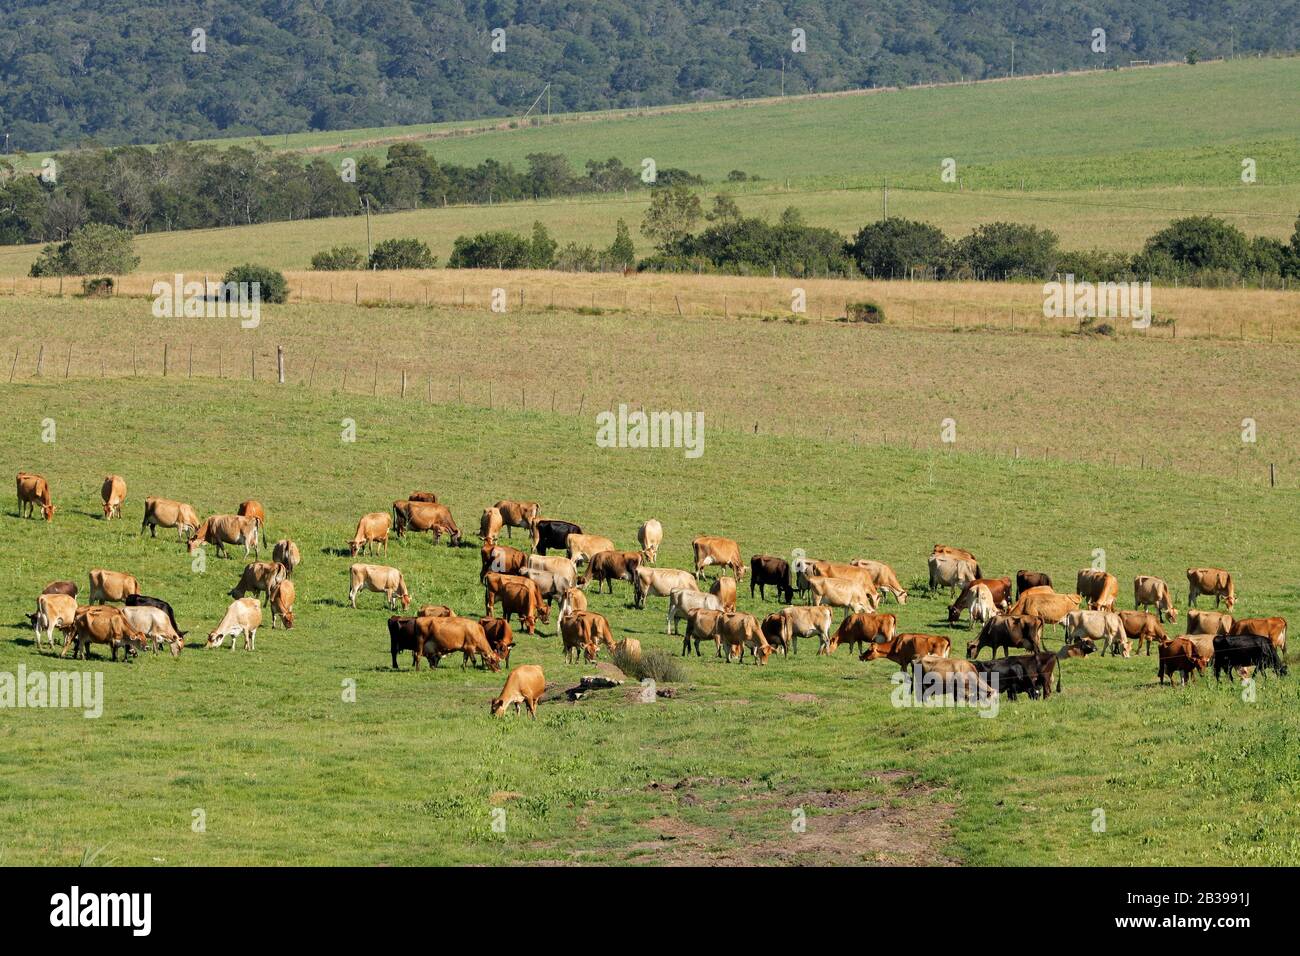 Dairy cows grazing on lush green pasture of a rural farm, South Africa Stock Photo